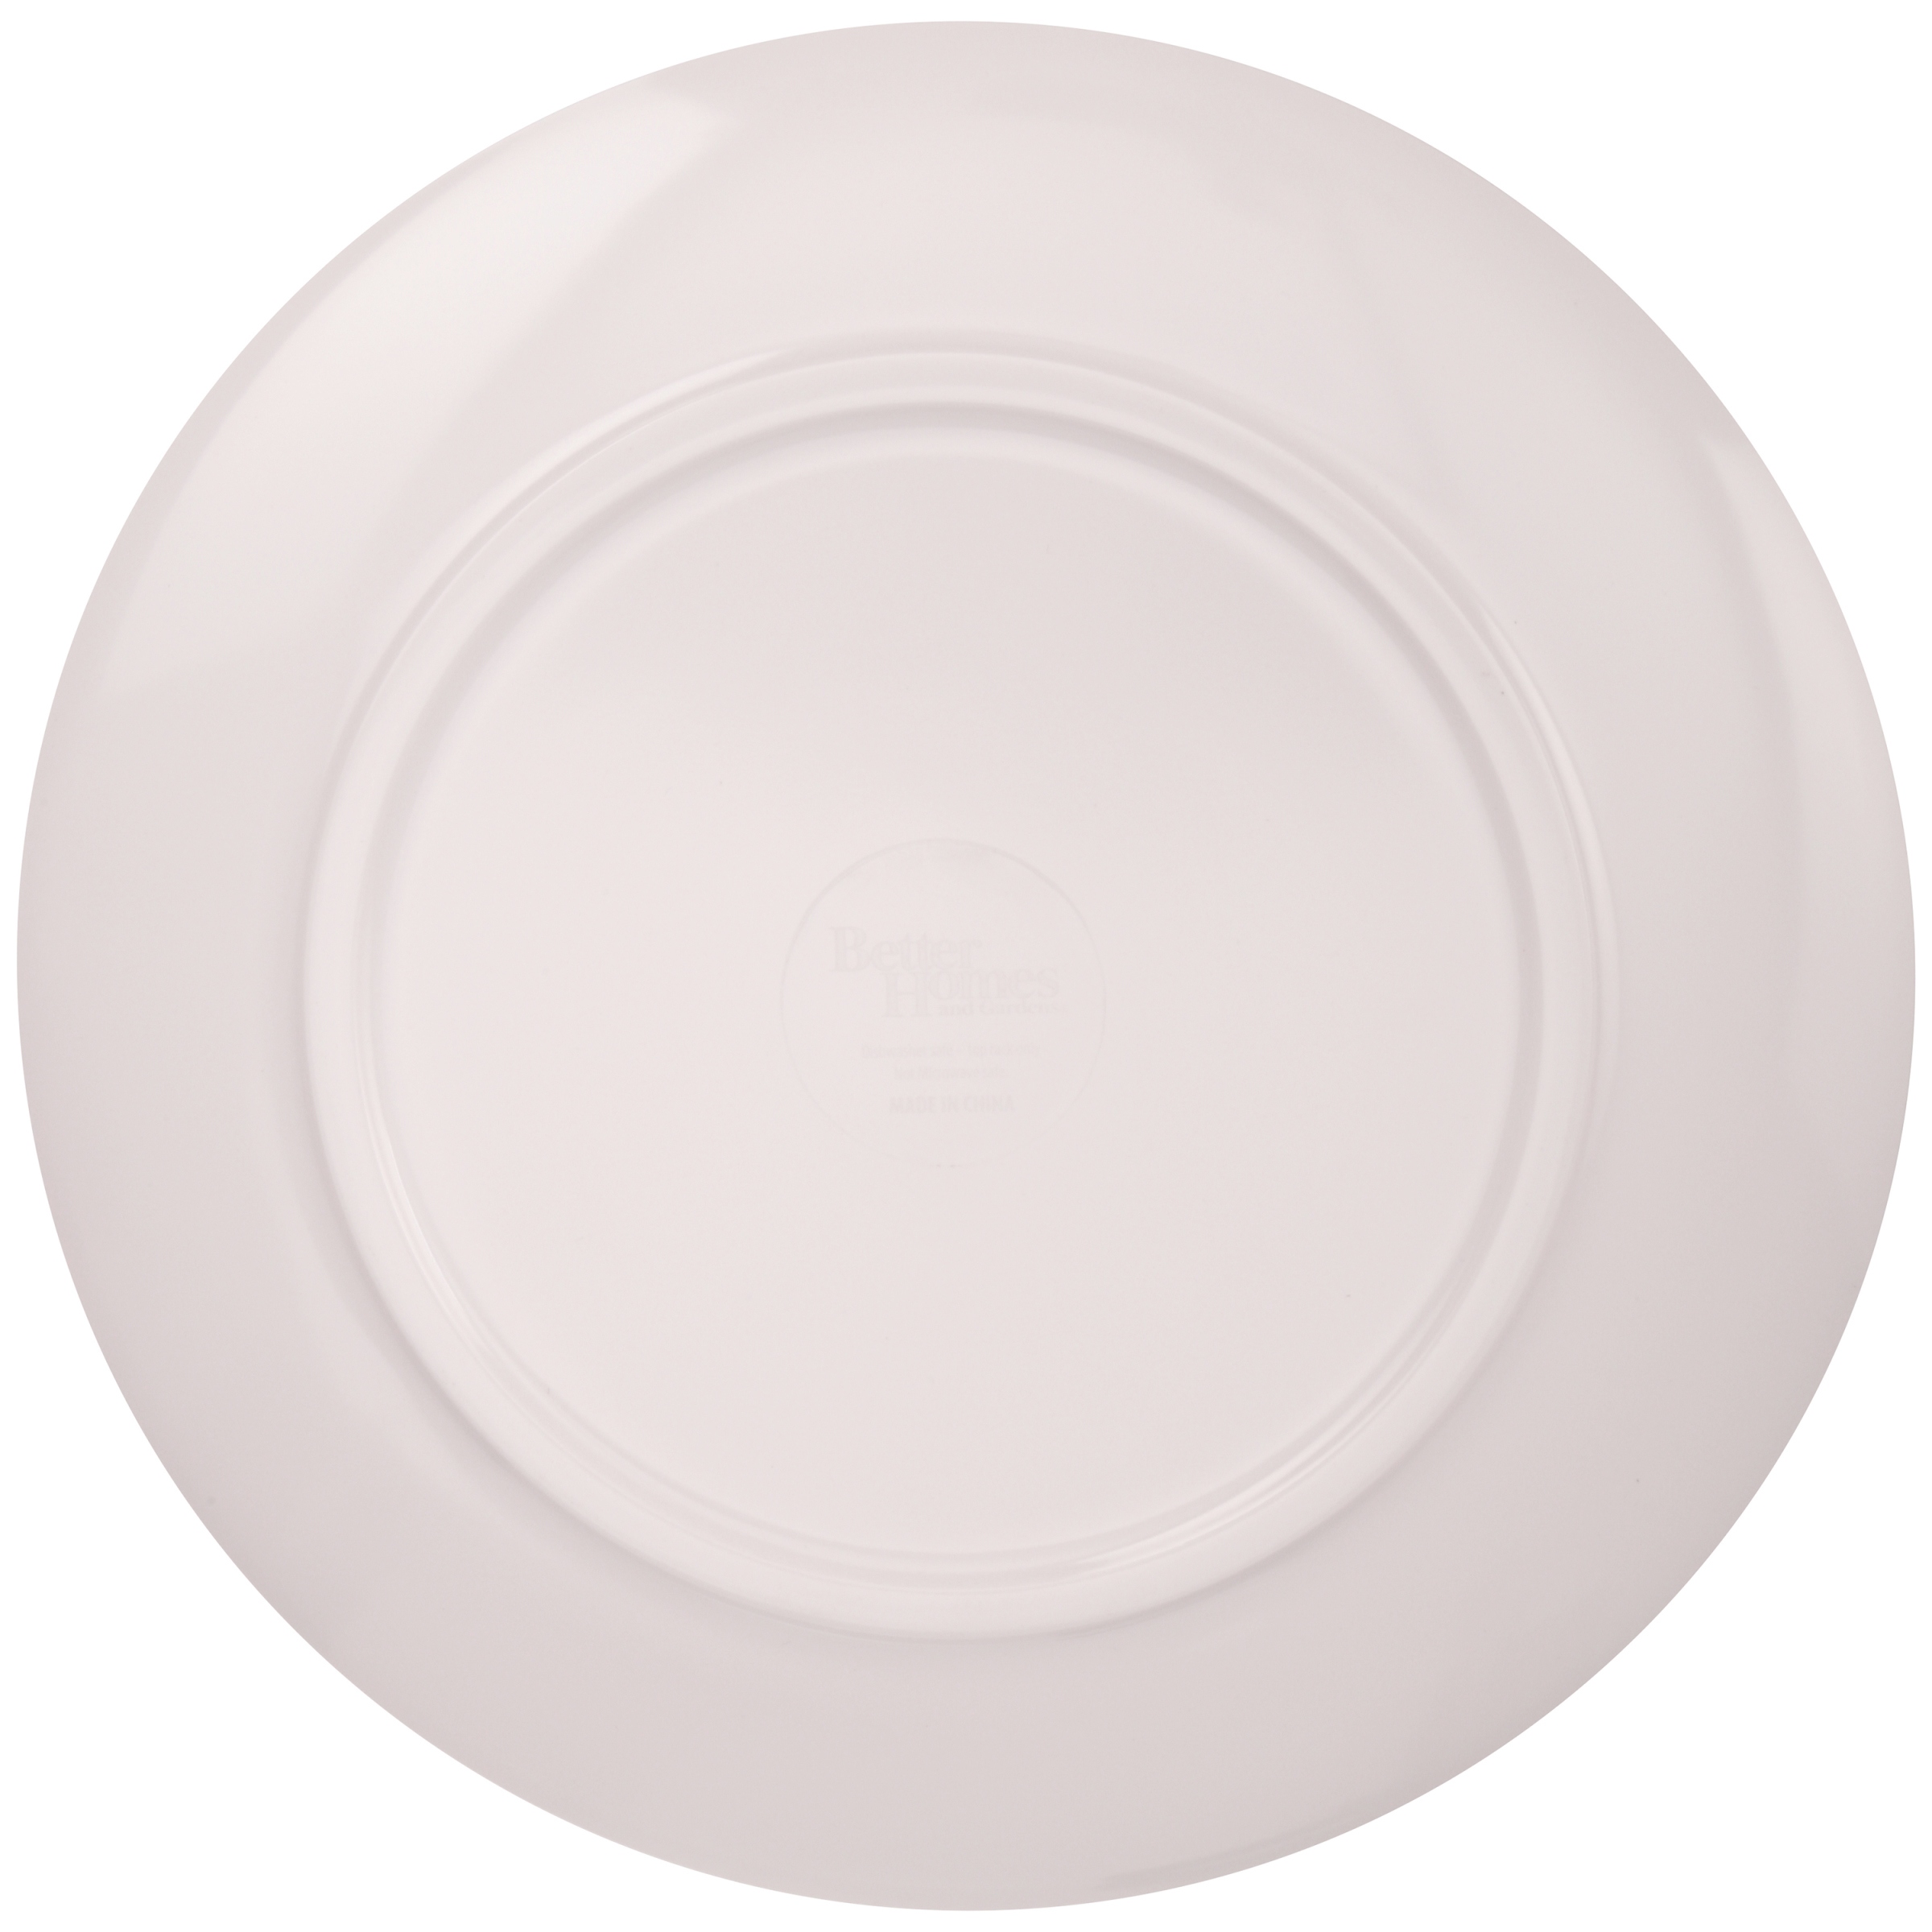 Better Homes & Gardens Outdoor Melamine Mint Triangle Lines Dinner Plate, Set of 4 - image 2 of 3